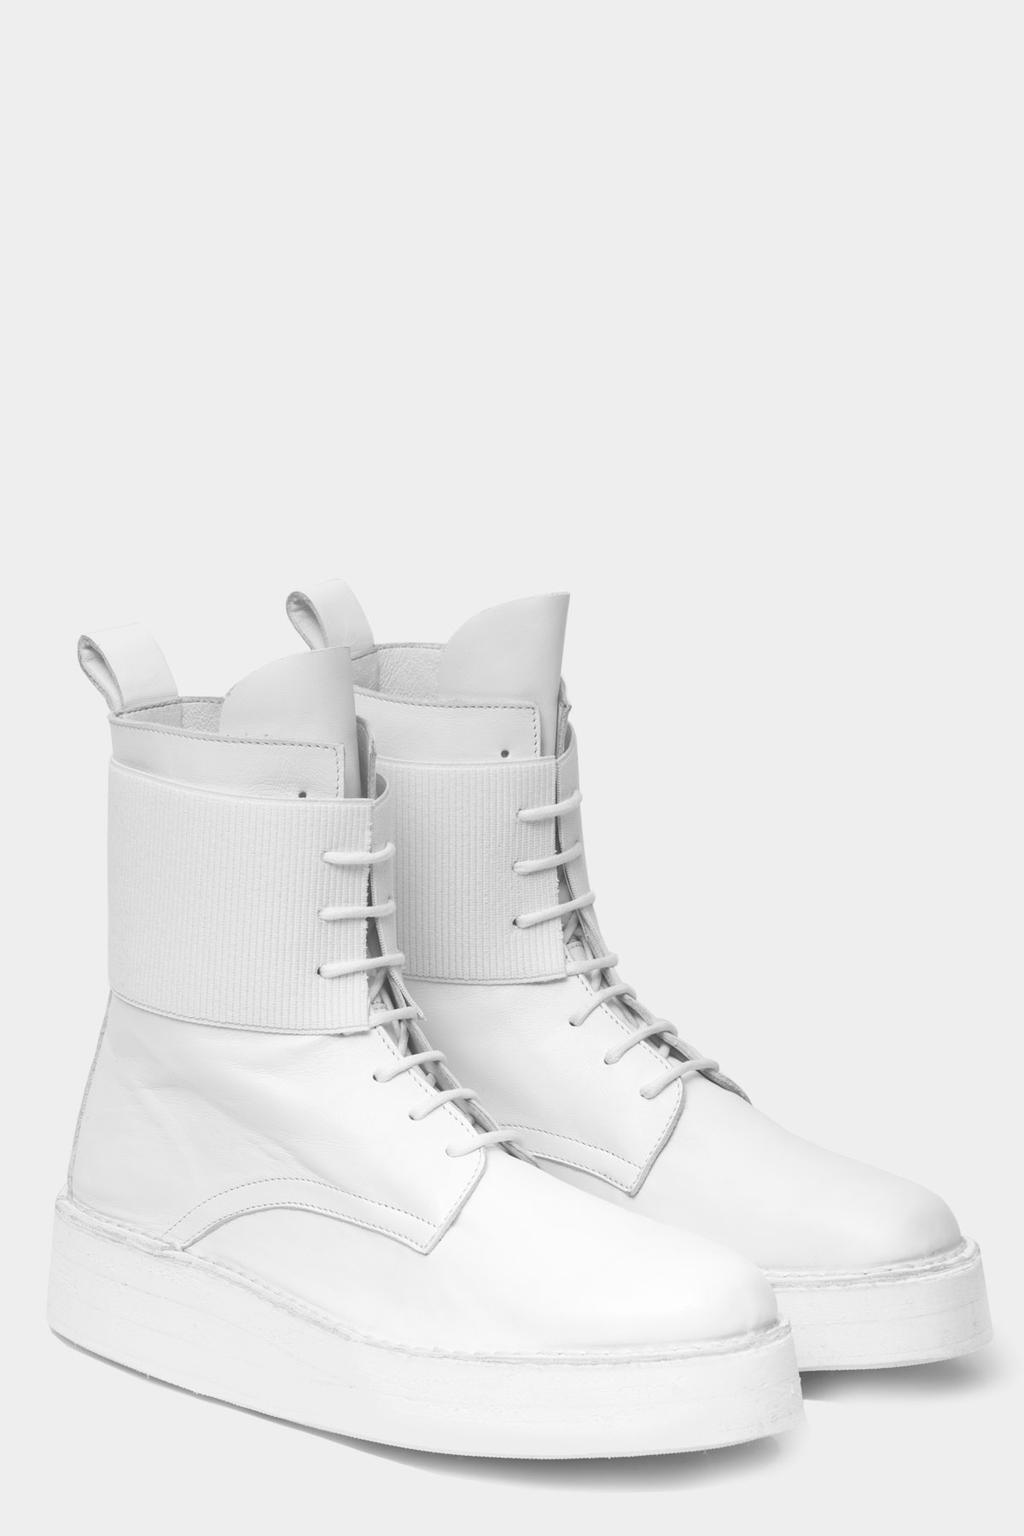 OA 06-2 Solid Boot High top boot in genuine untreated white leather with solid light micro sole. Height of sole is 4 cm at heel point.